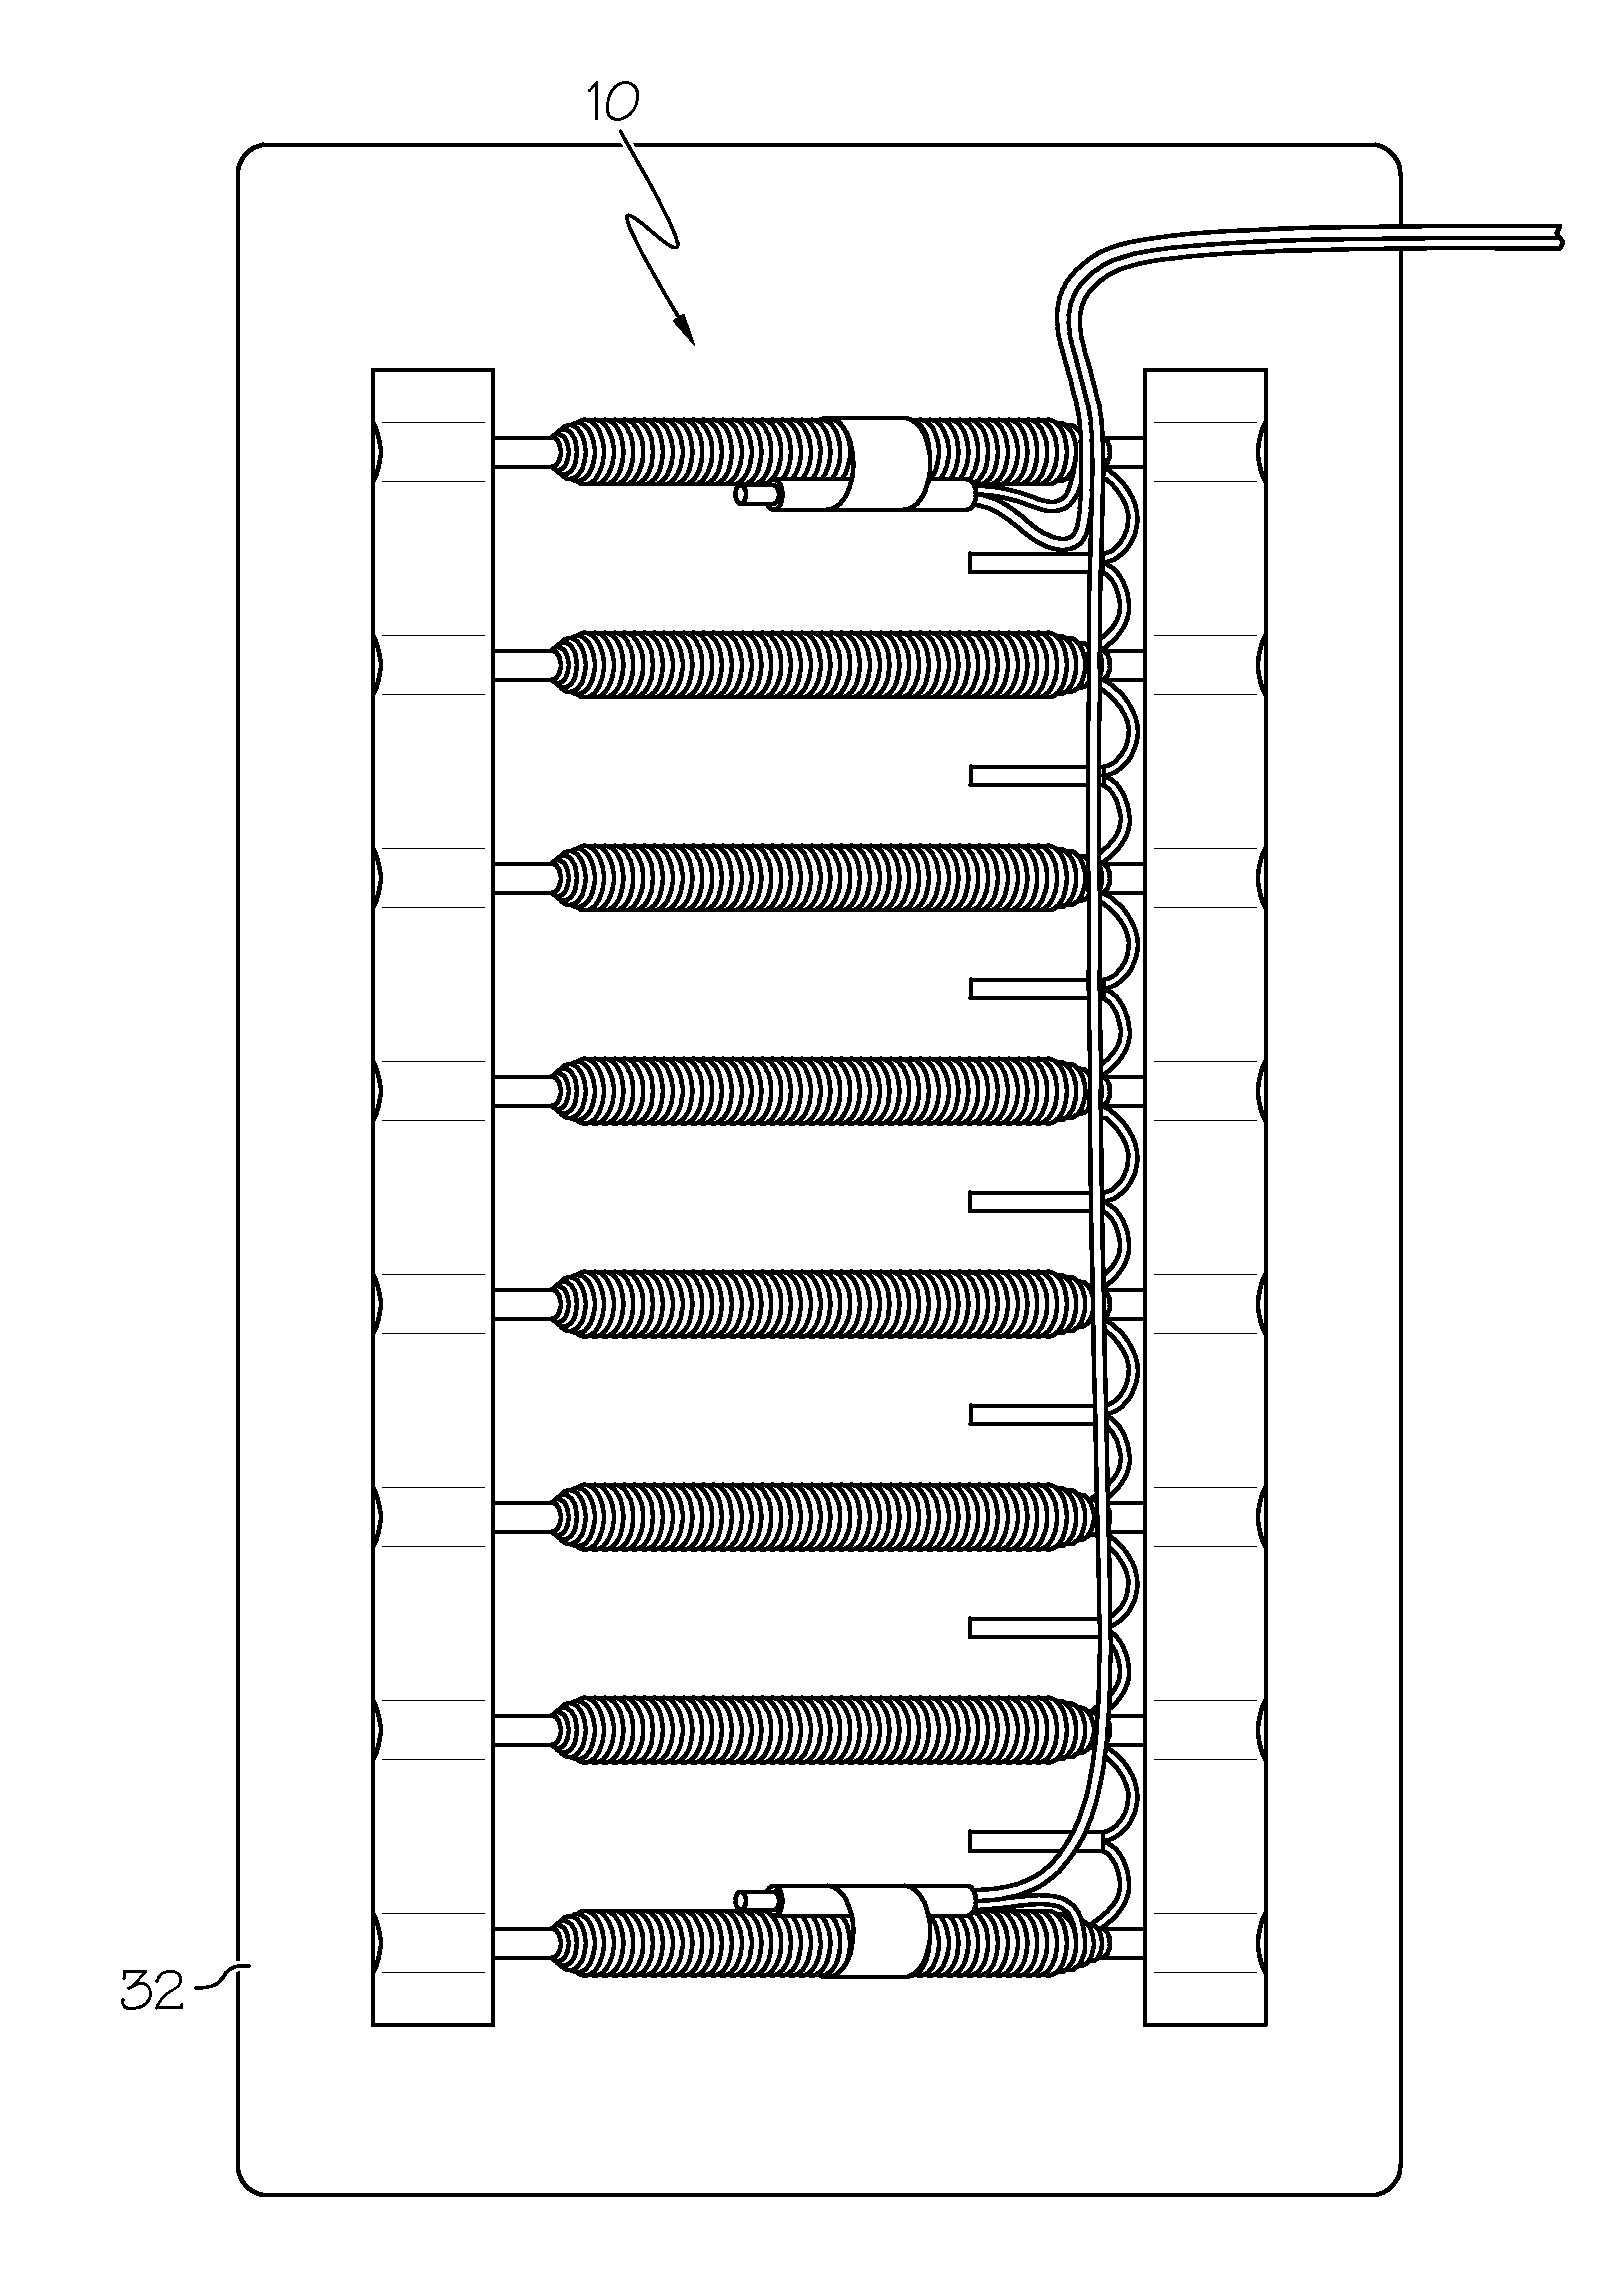 Apparatus for generating a multi-vibrational field